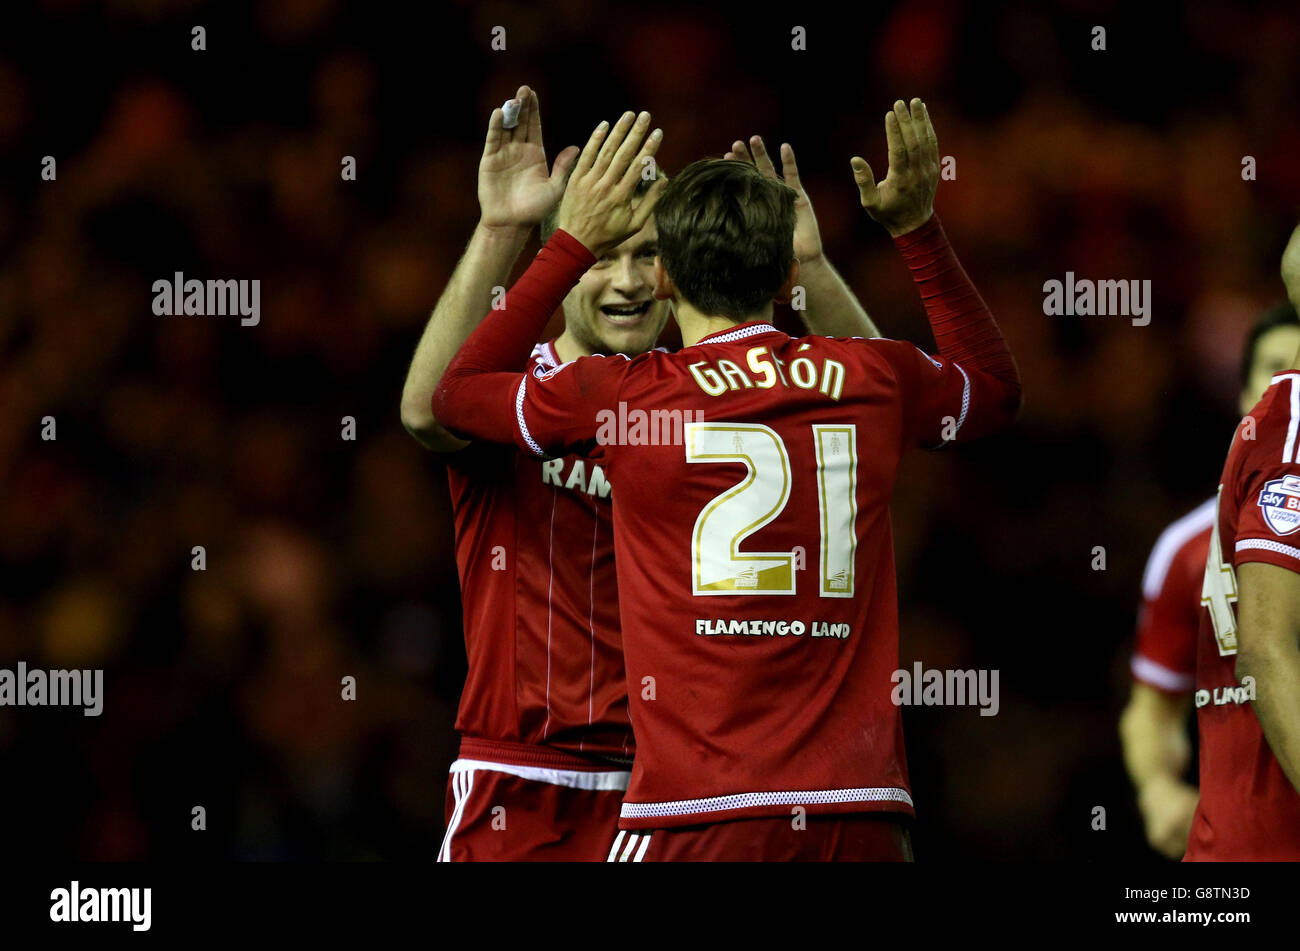 Middlesbrough's Gaston Ramirez (right) celebrates scoring his side's second goal of the game with teammate Ben Gibson during the Sky Bet Championship match at the Riverside Stadium, Middlesbrough. Stock Photo